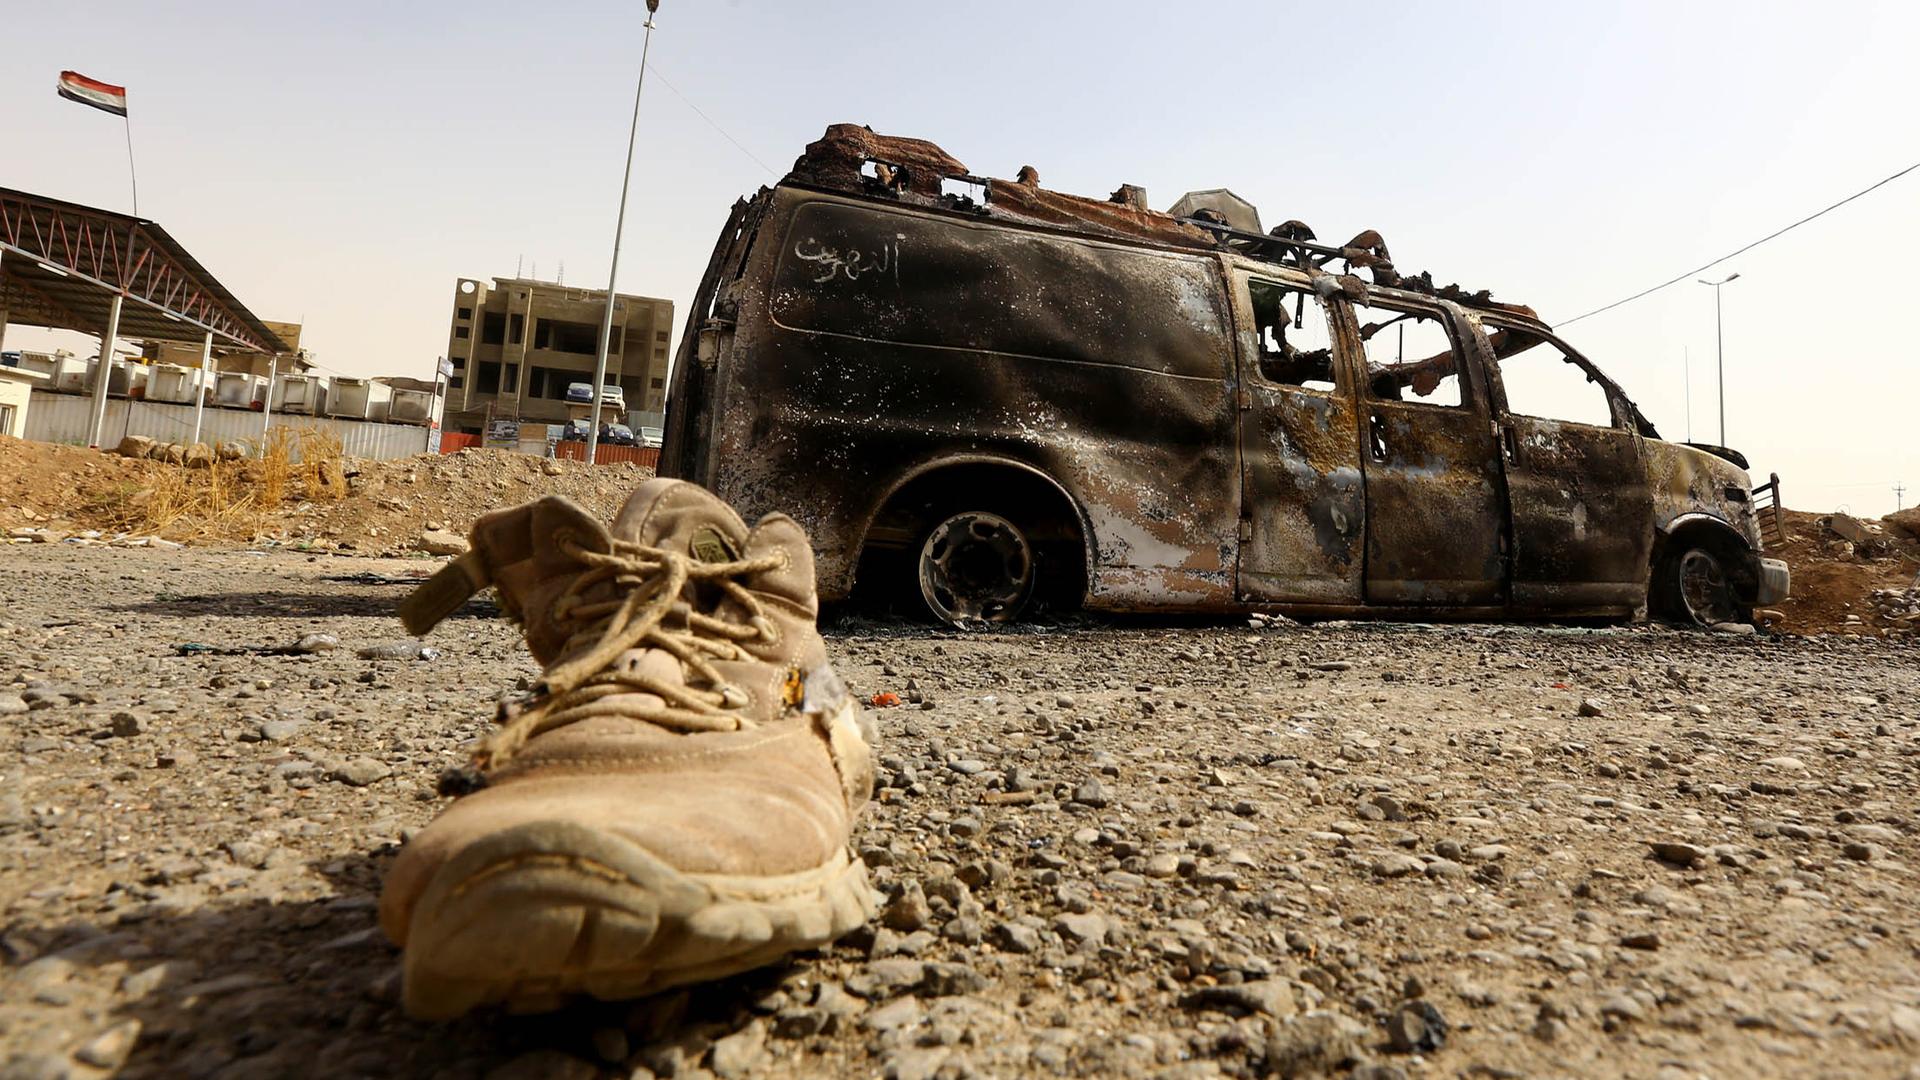 A burnt vehicle belonging to Iraqi security forces is pictured at a checkpoint in east Mosul on June 11, 2014, one day after radical Sunni Muslim insurgents seized control of the city.